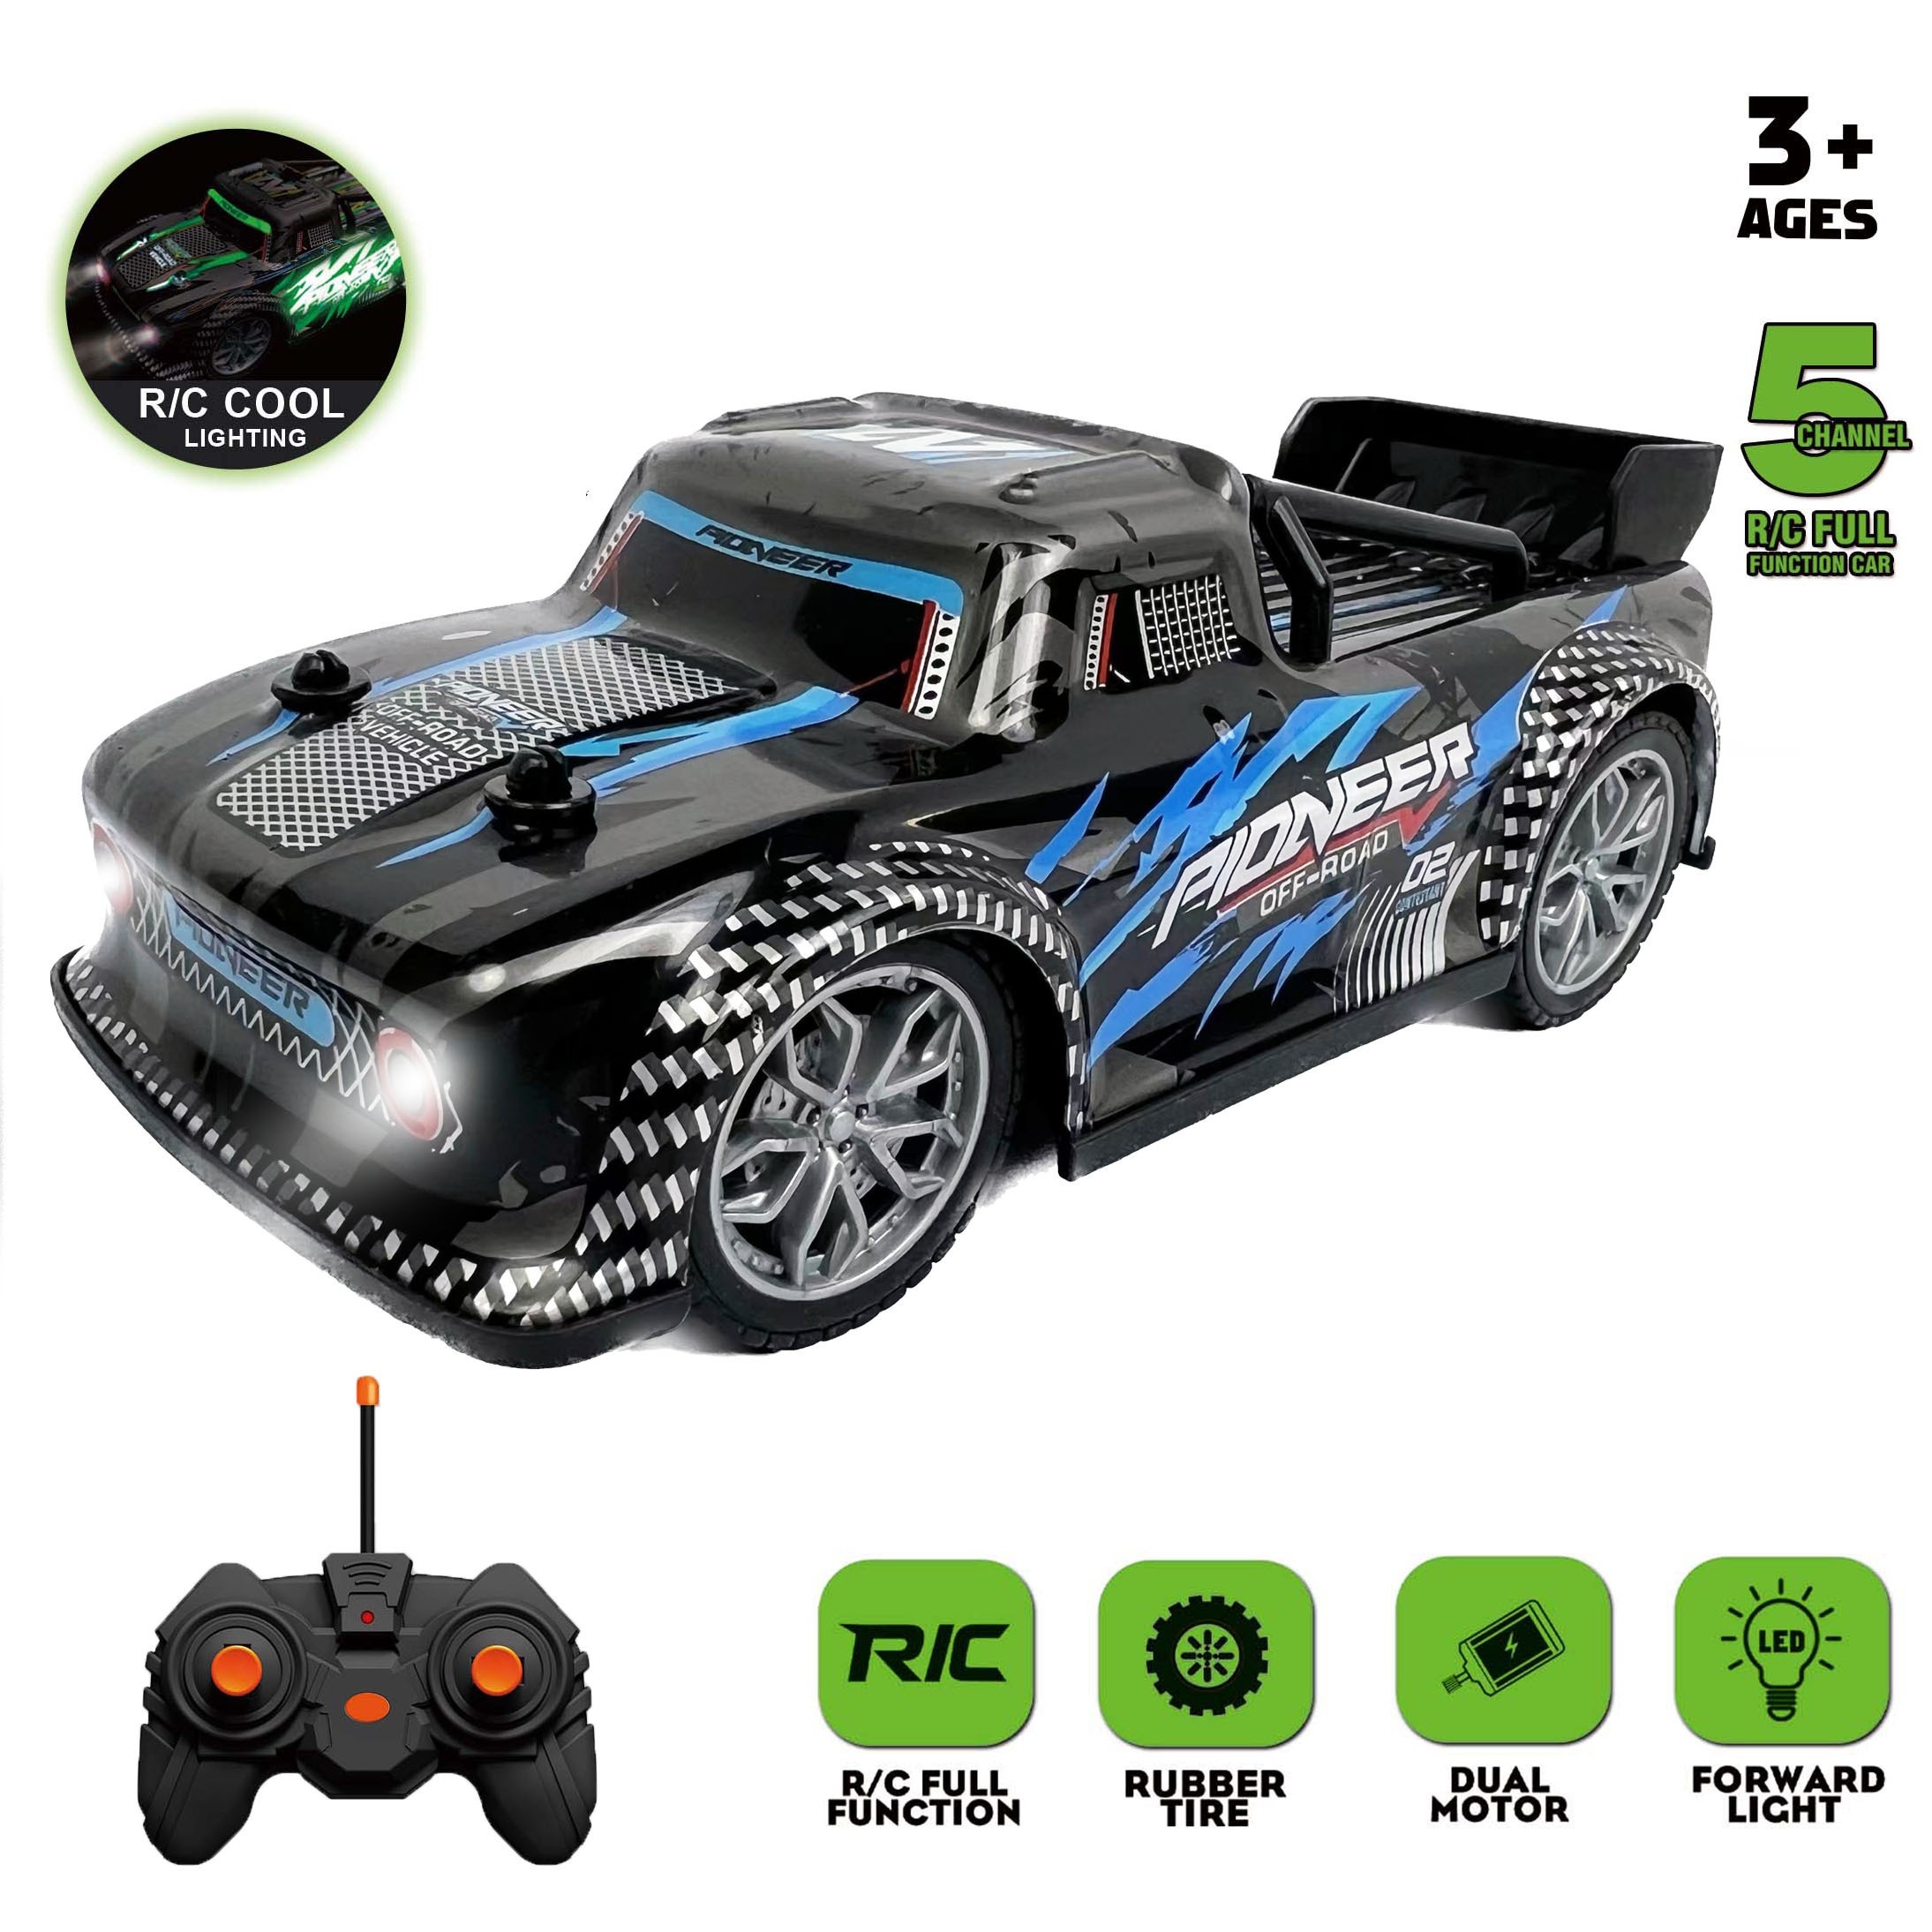 

Super-fast Remote Control Car - 3.7v Lithium Battery Powered!